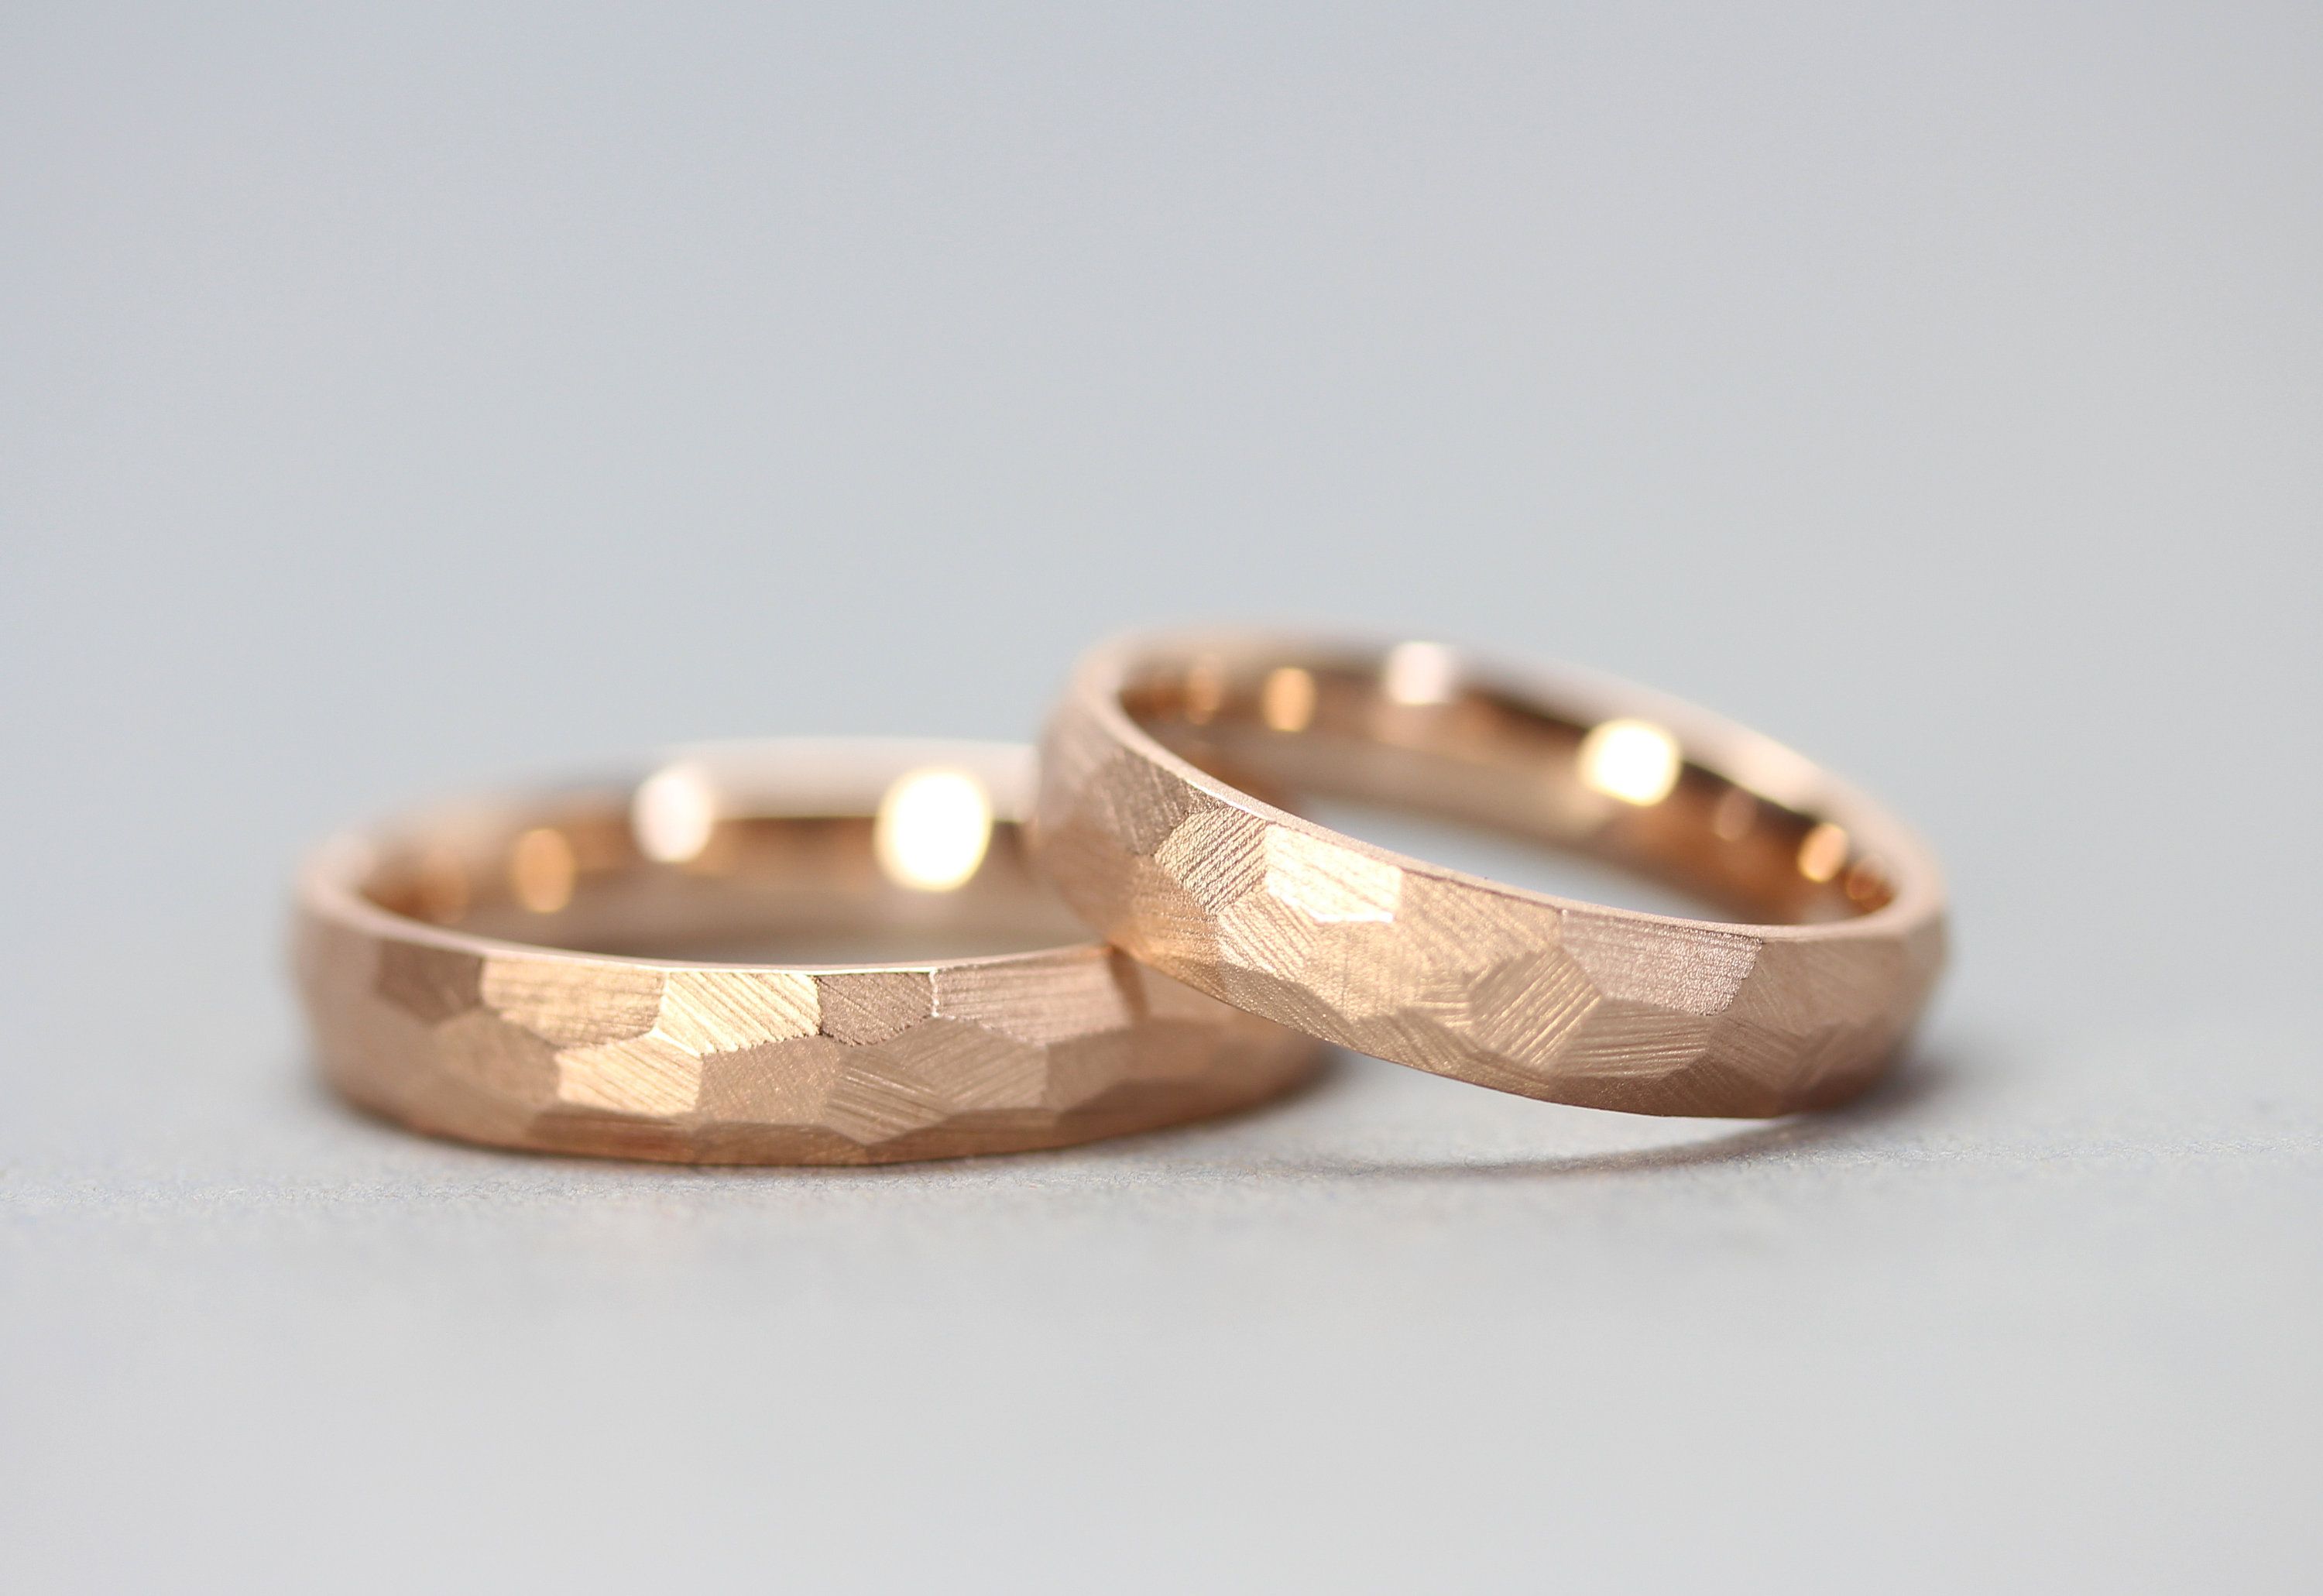 Multifaceted Wedding Rings In 585/red Gold Inside Most Recent Multifaceted Rings (View 12 of 25)